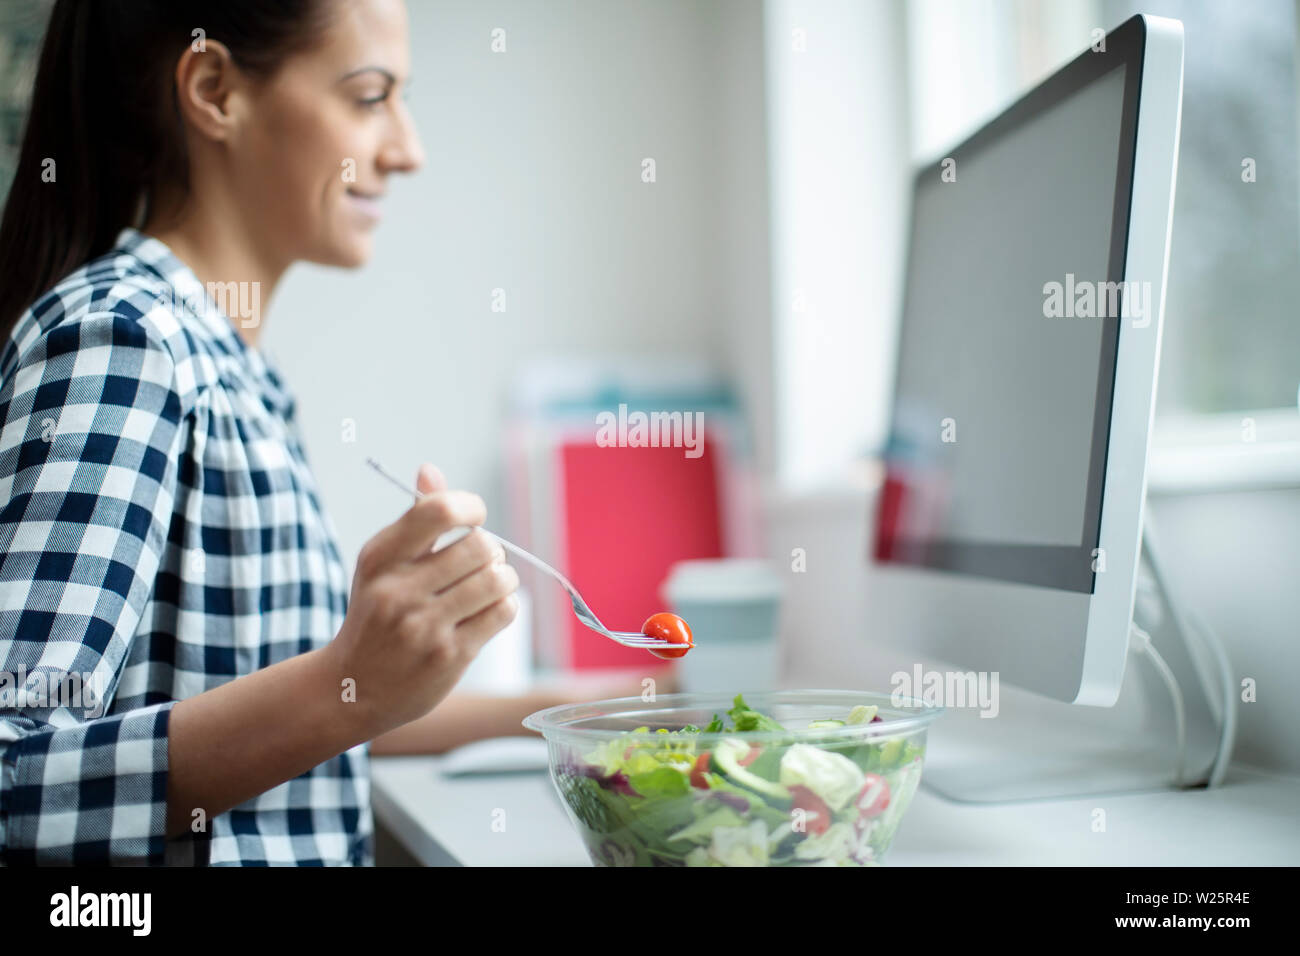 Female Worker In Office Having Healthy Salad Lunch At Desk Stock Photo